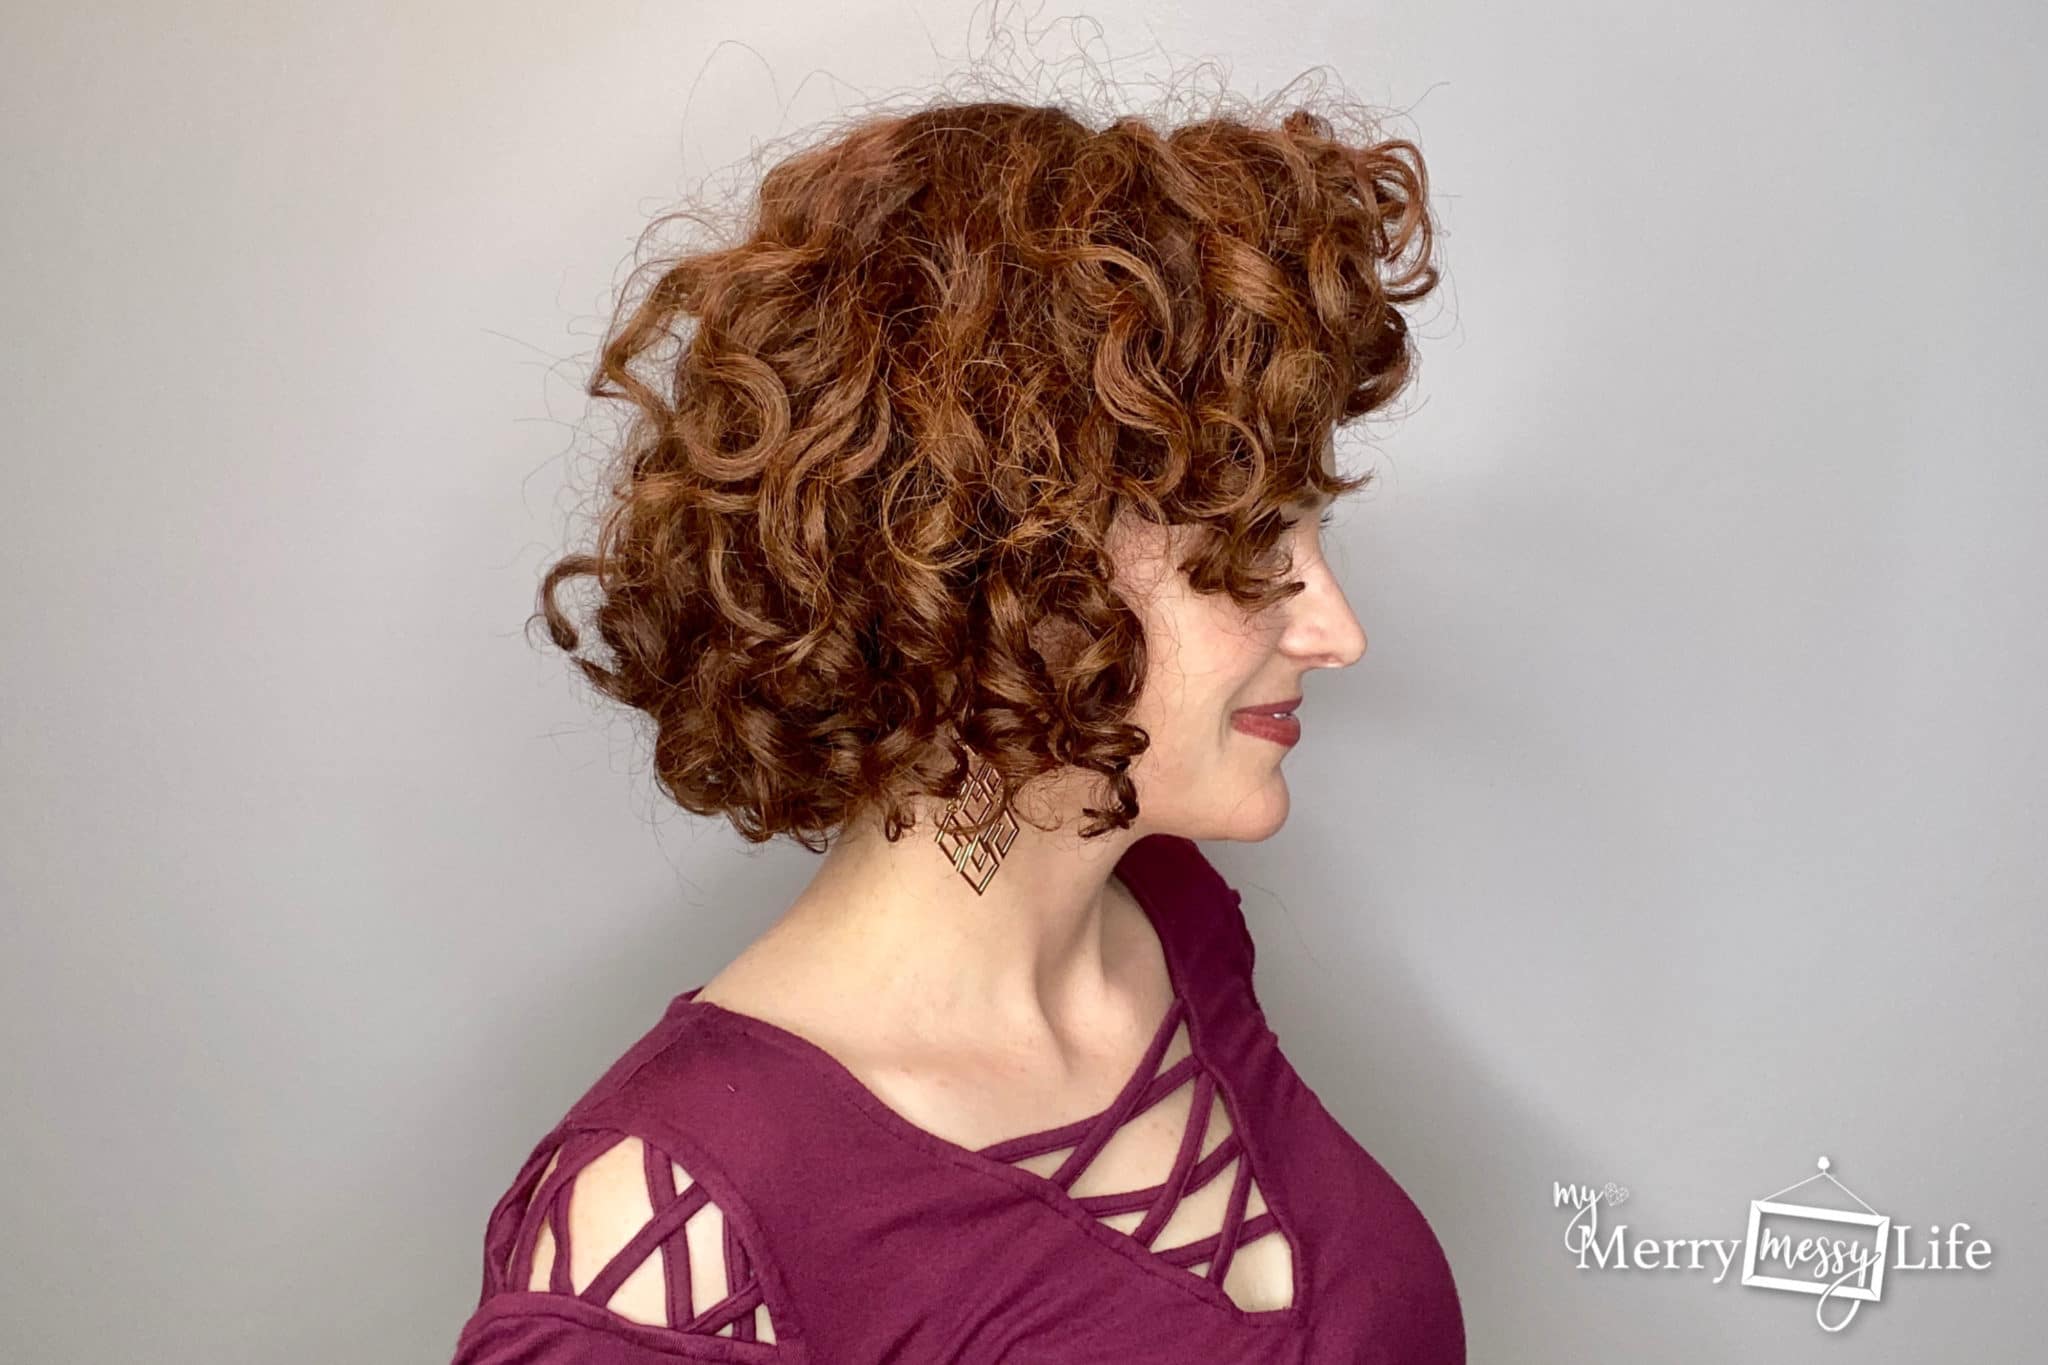 How to Fix Frizzy Hair to Reveal Beautiful Curls and Waves Using the Curly Girl Method, Deep Conditioning, Protein and Bond Repair Treatments